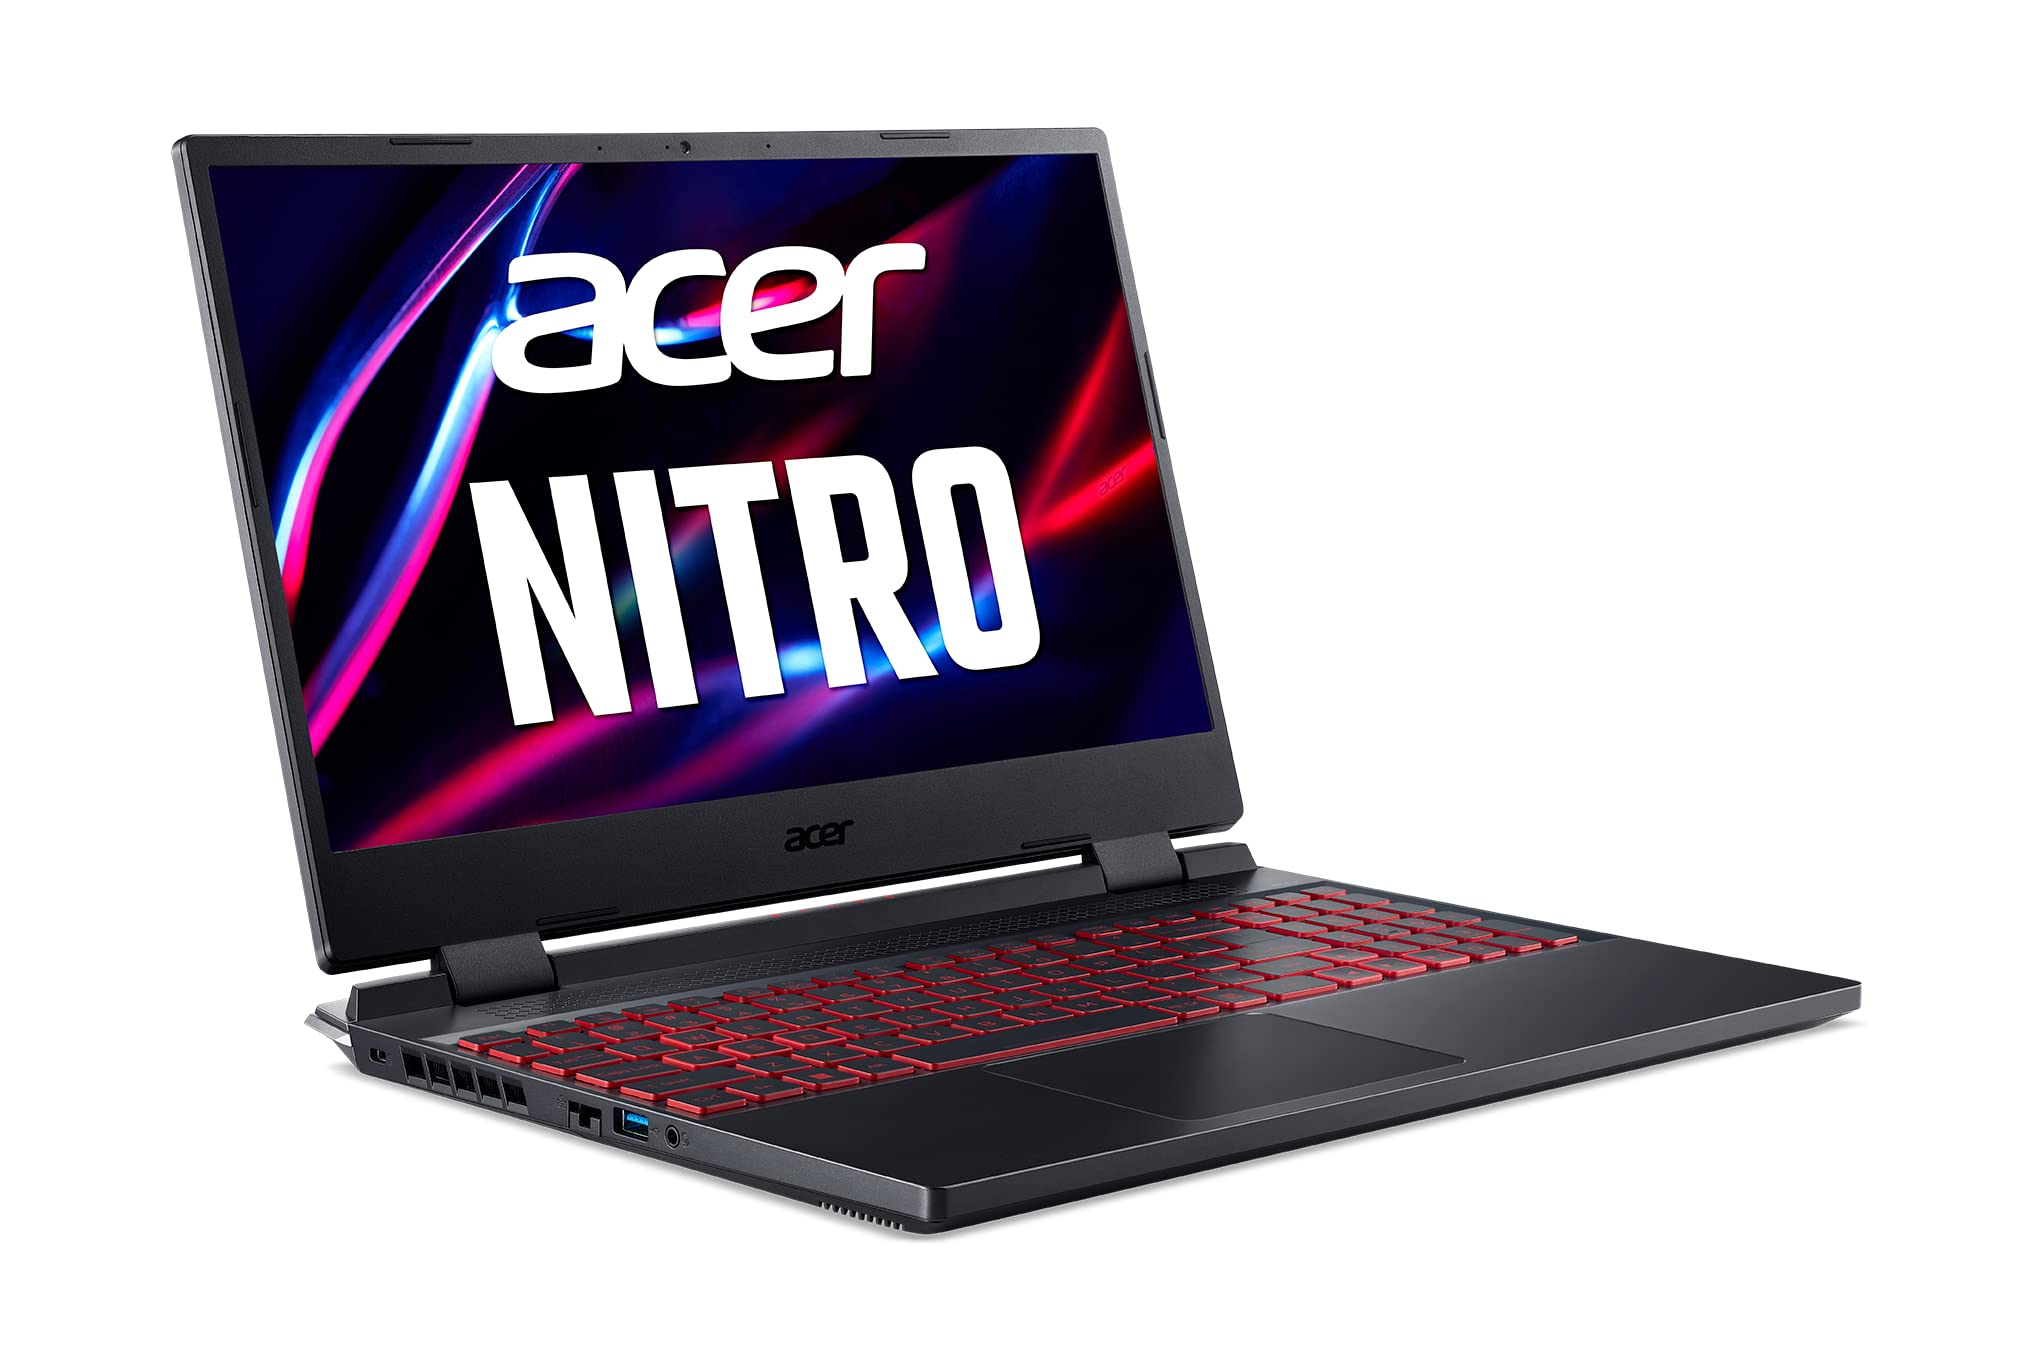 Acer Nitro 5 AN515 Gaming Notebook 12th Gen Intel Core i7-12700H 14 Cores Upto 4.70GHz/16GB/512GB SSD/4GB NVIDIA®GeForce®RTX 3050/15.6" FHD IPS 144Hz/Win 11 Home/Killer WiFi-6/Obsidian Black